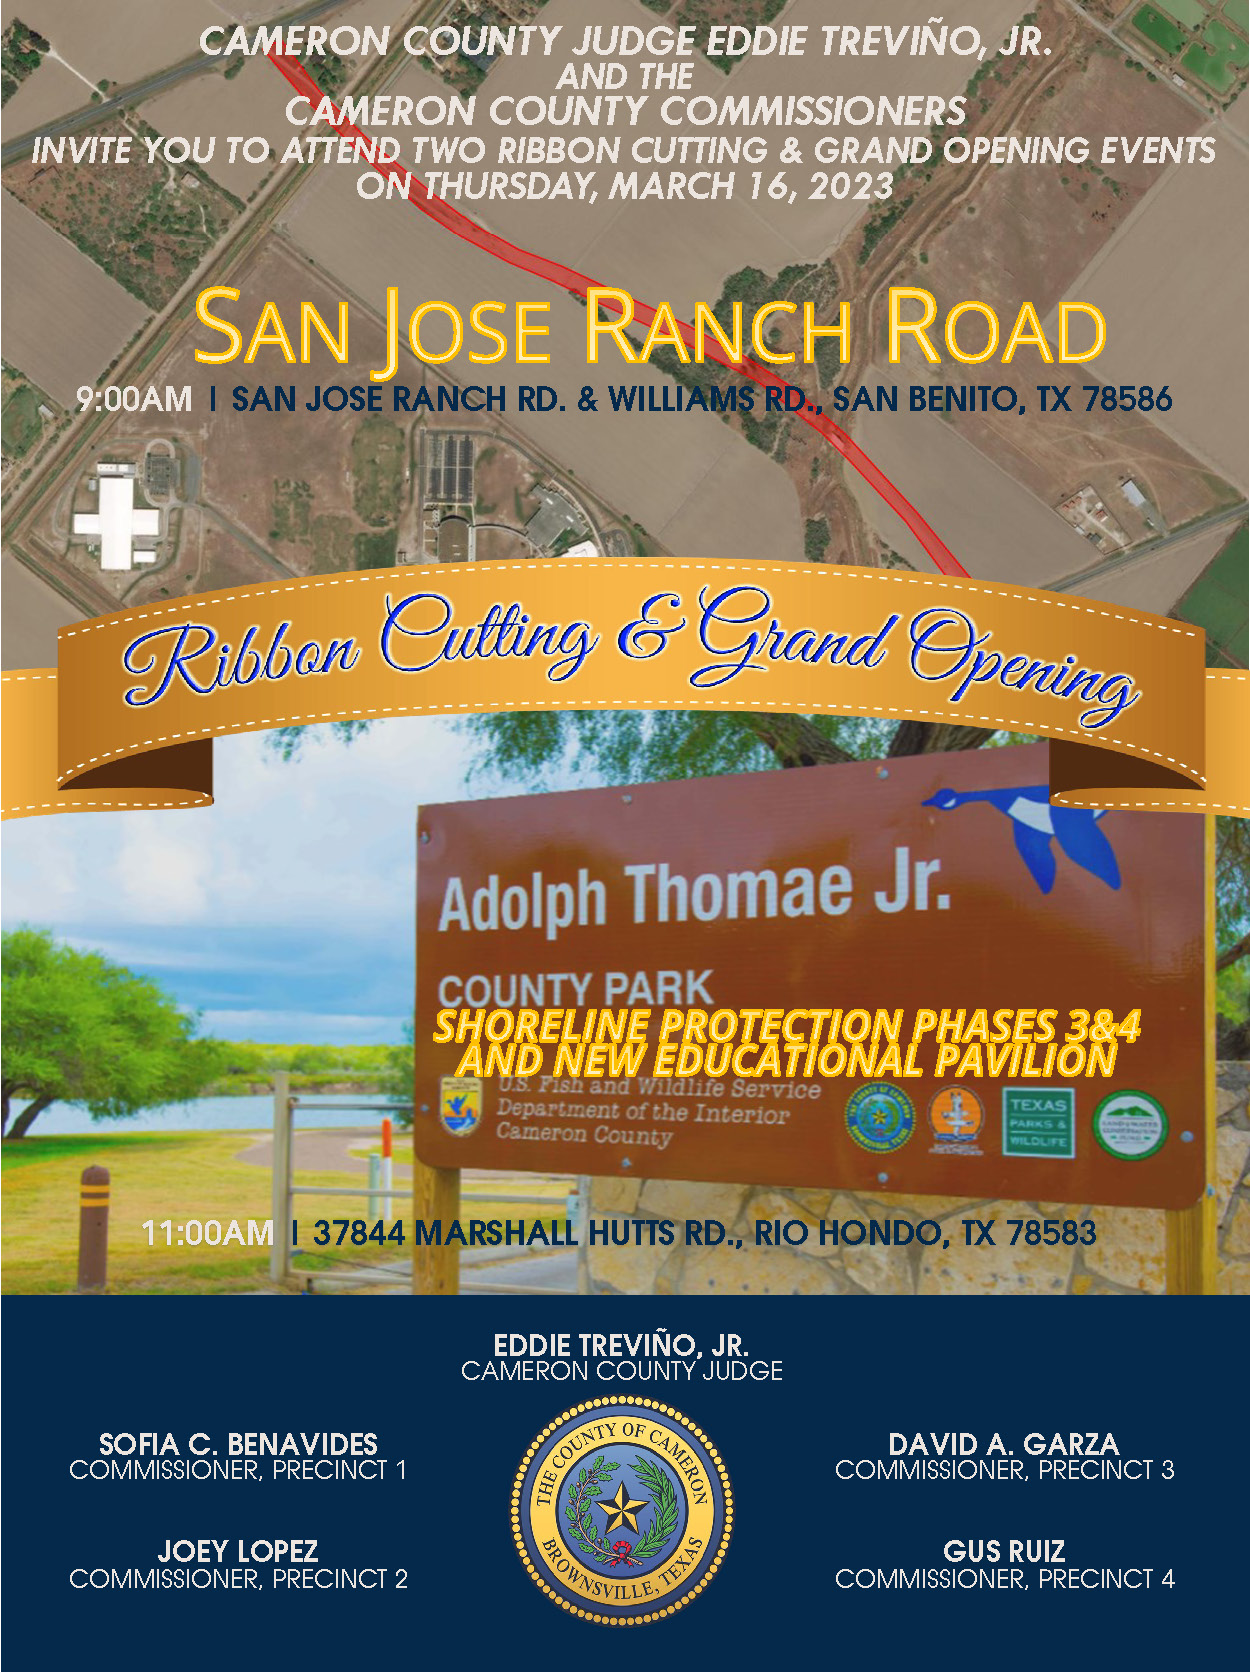 Invite For San Jose Ranch Road Adolph Thomae